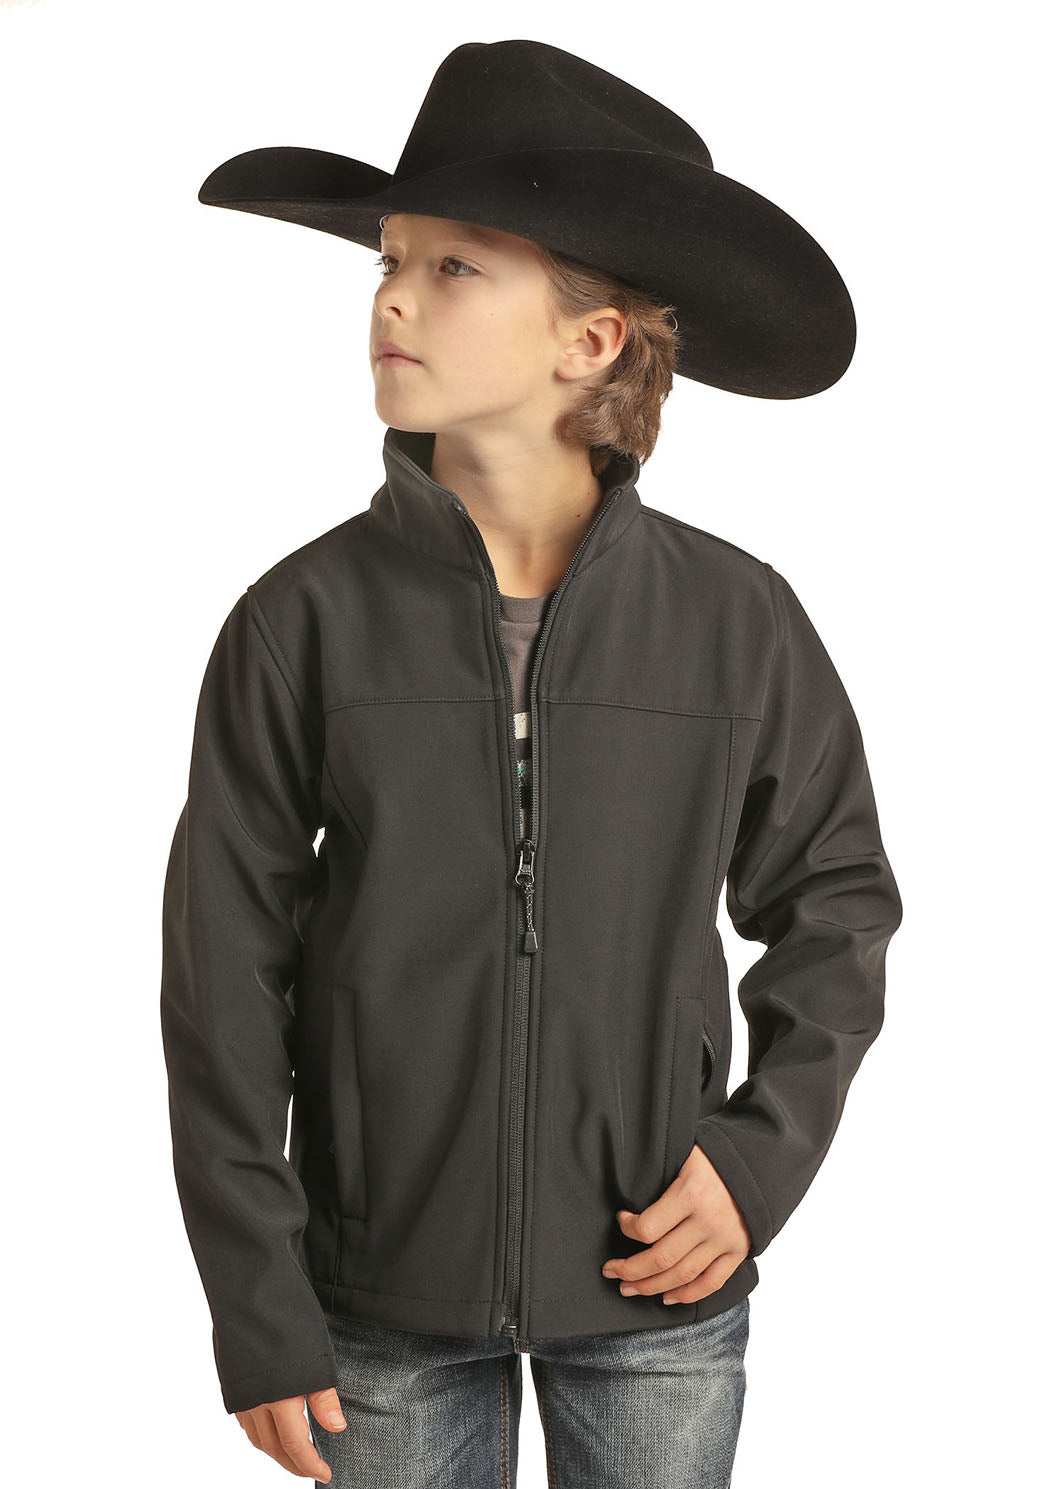 KID'S POWDER RIVER OUTFITTERS PERFORMANCE SOFTSHELL JACKET in BLACK